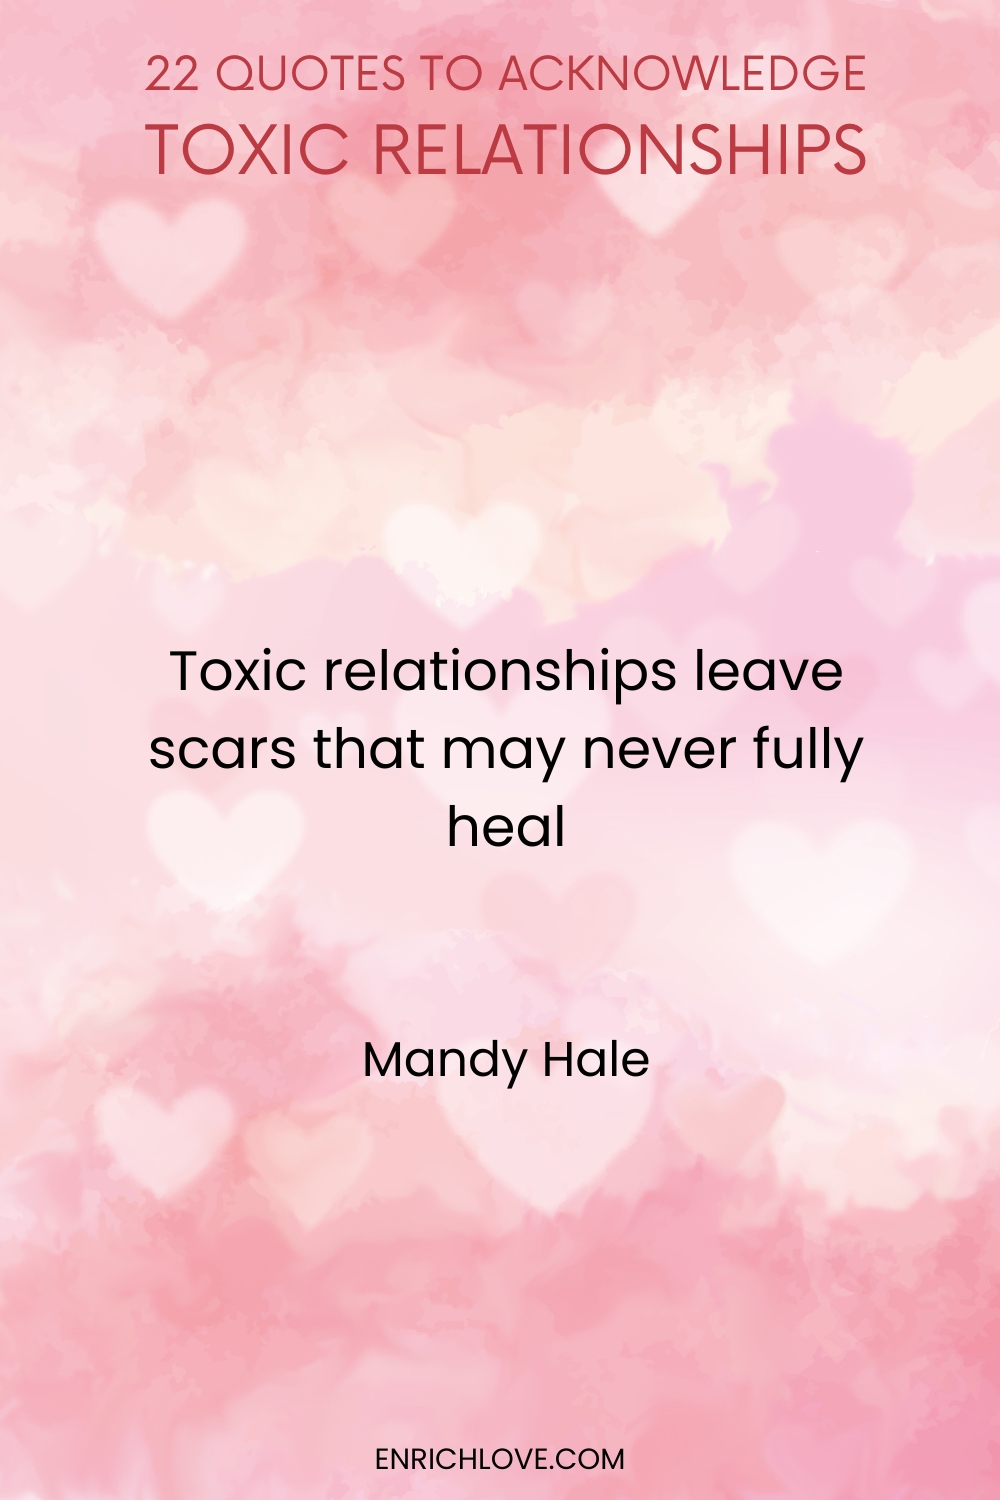 22 Quotes to Acknowledge Toxic Relationships -Toxic relationships leave scars that may never fully heal by Mandy Hale